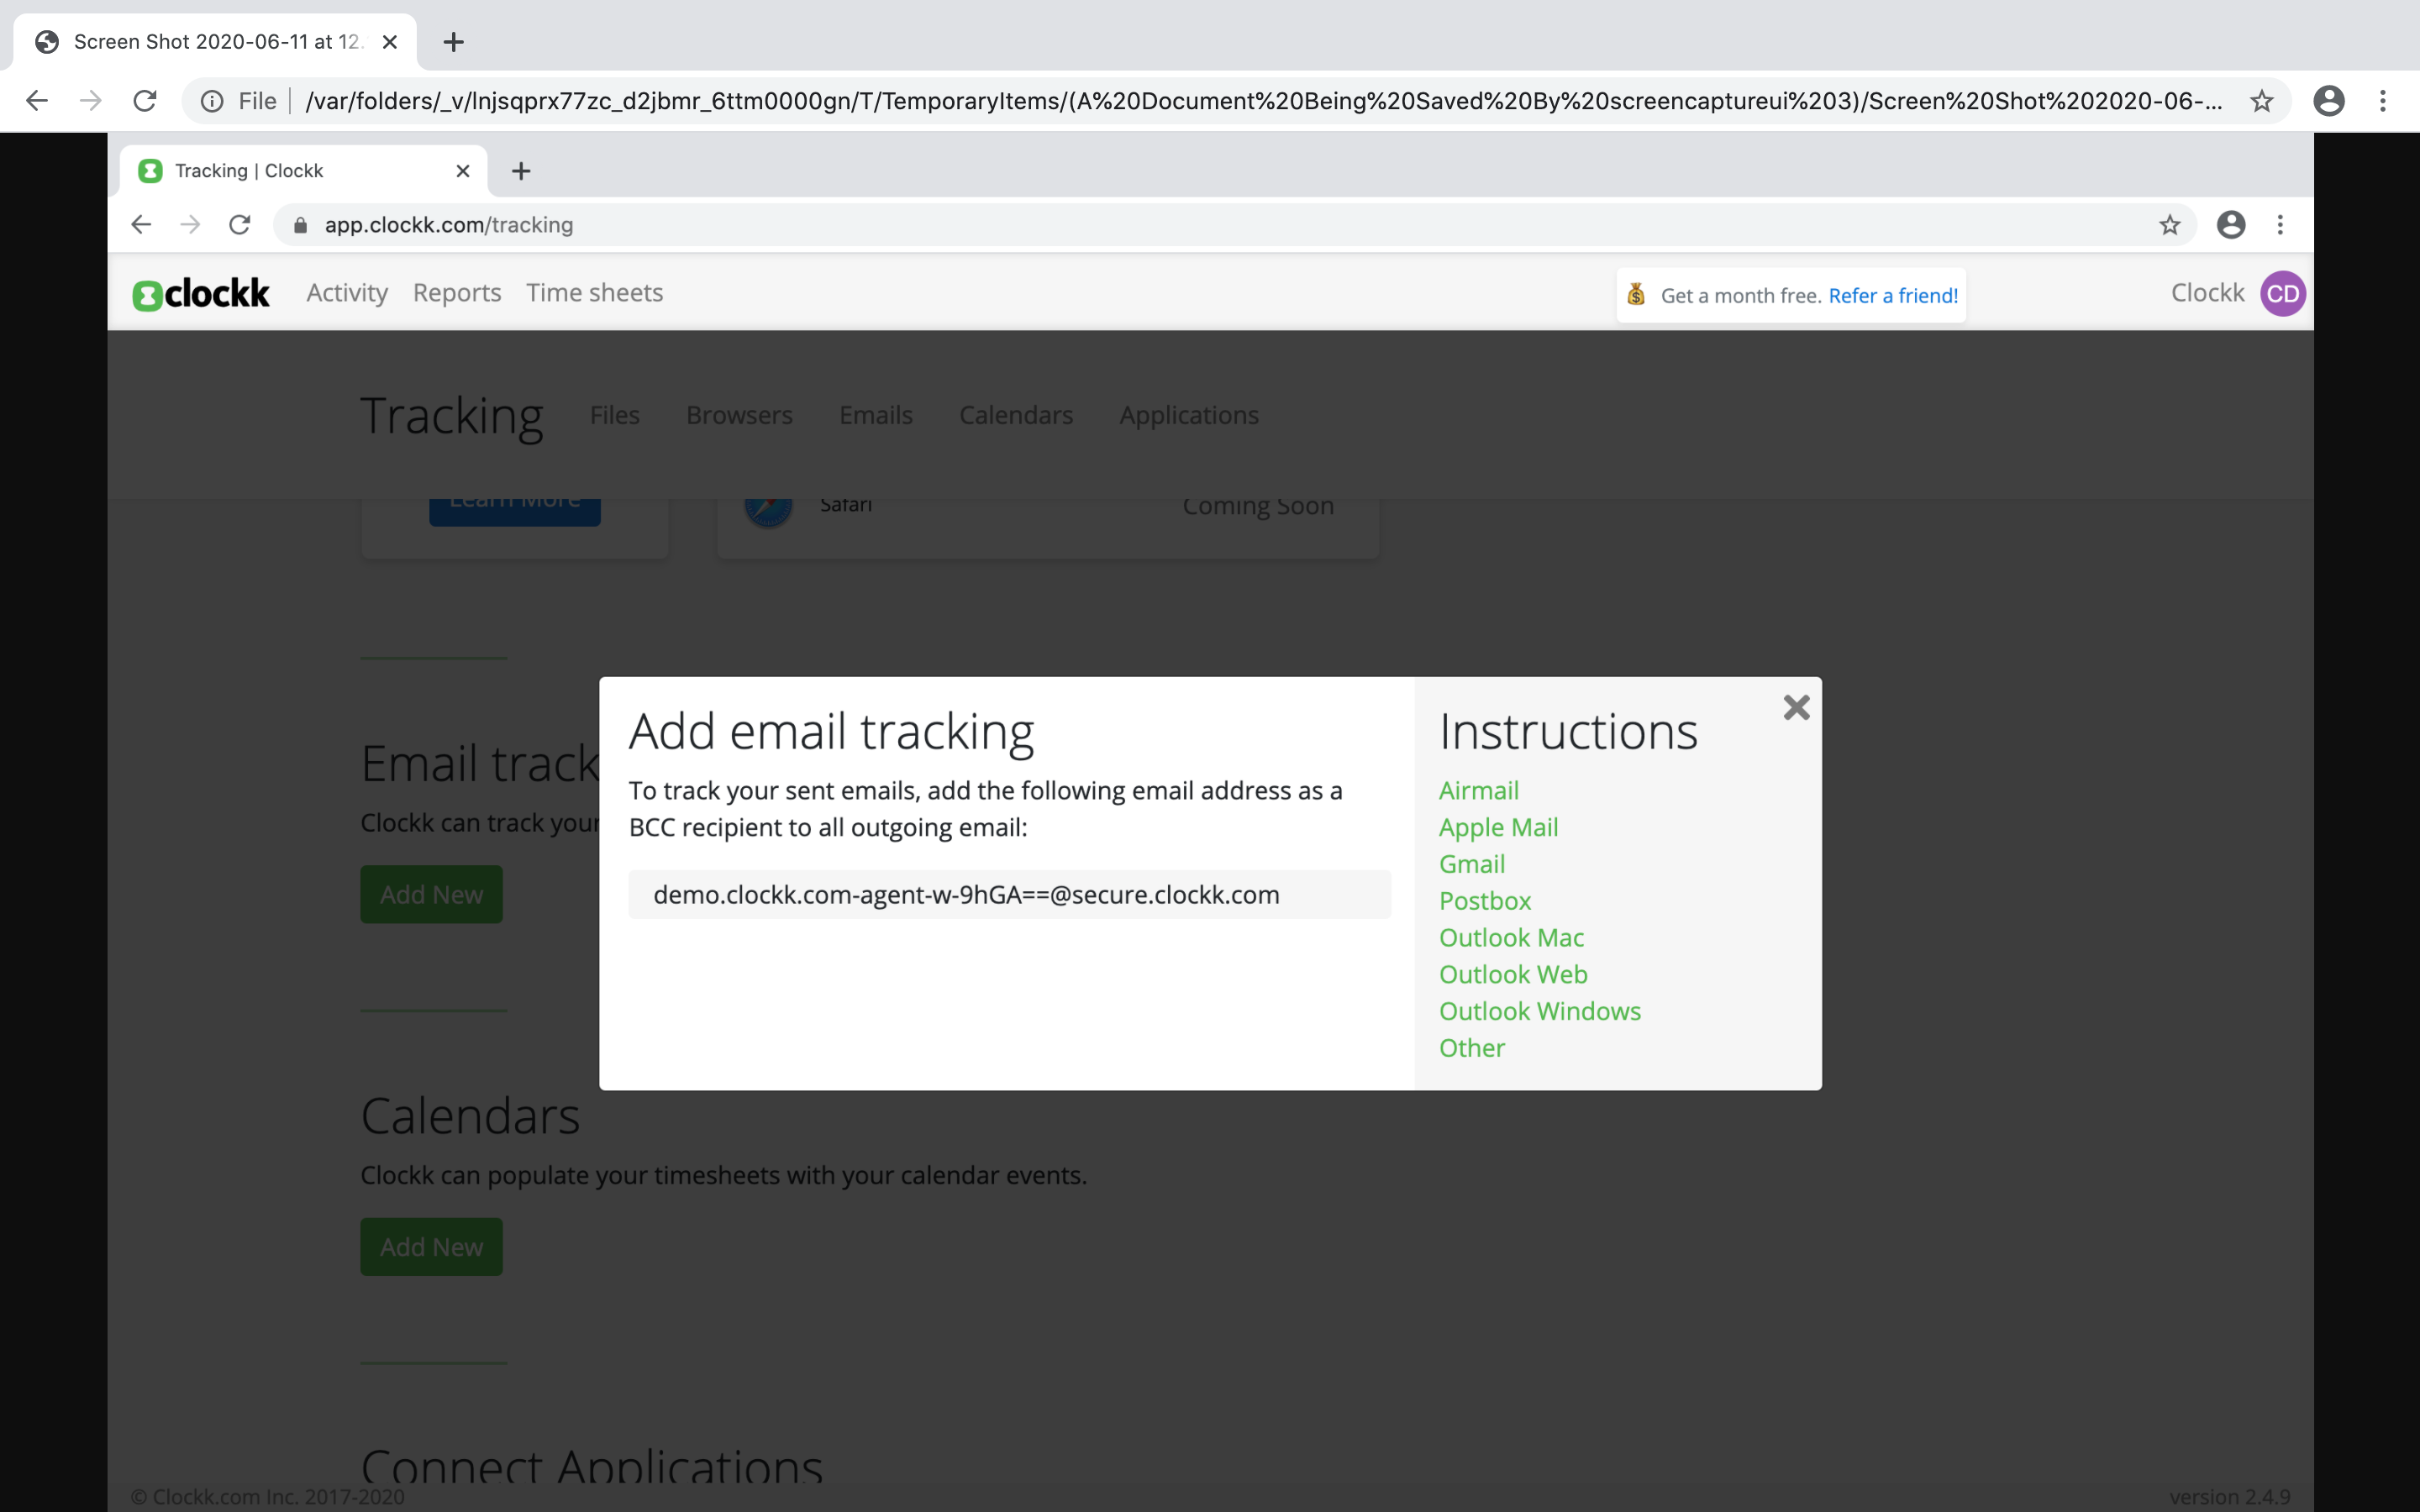 Add email tracking